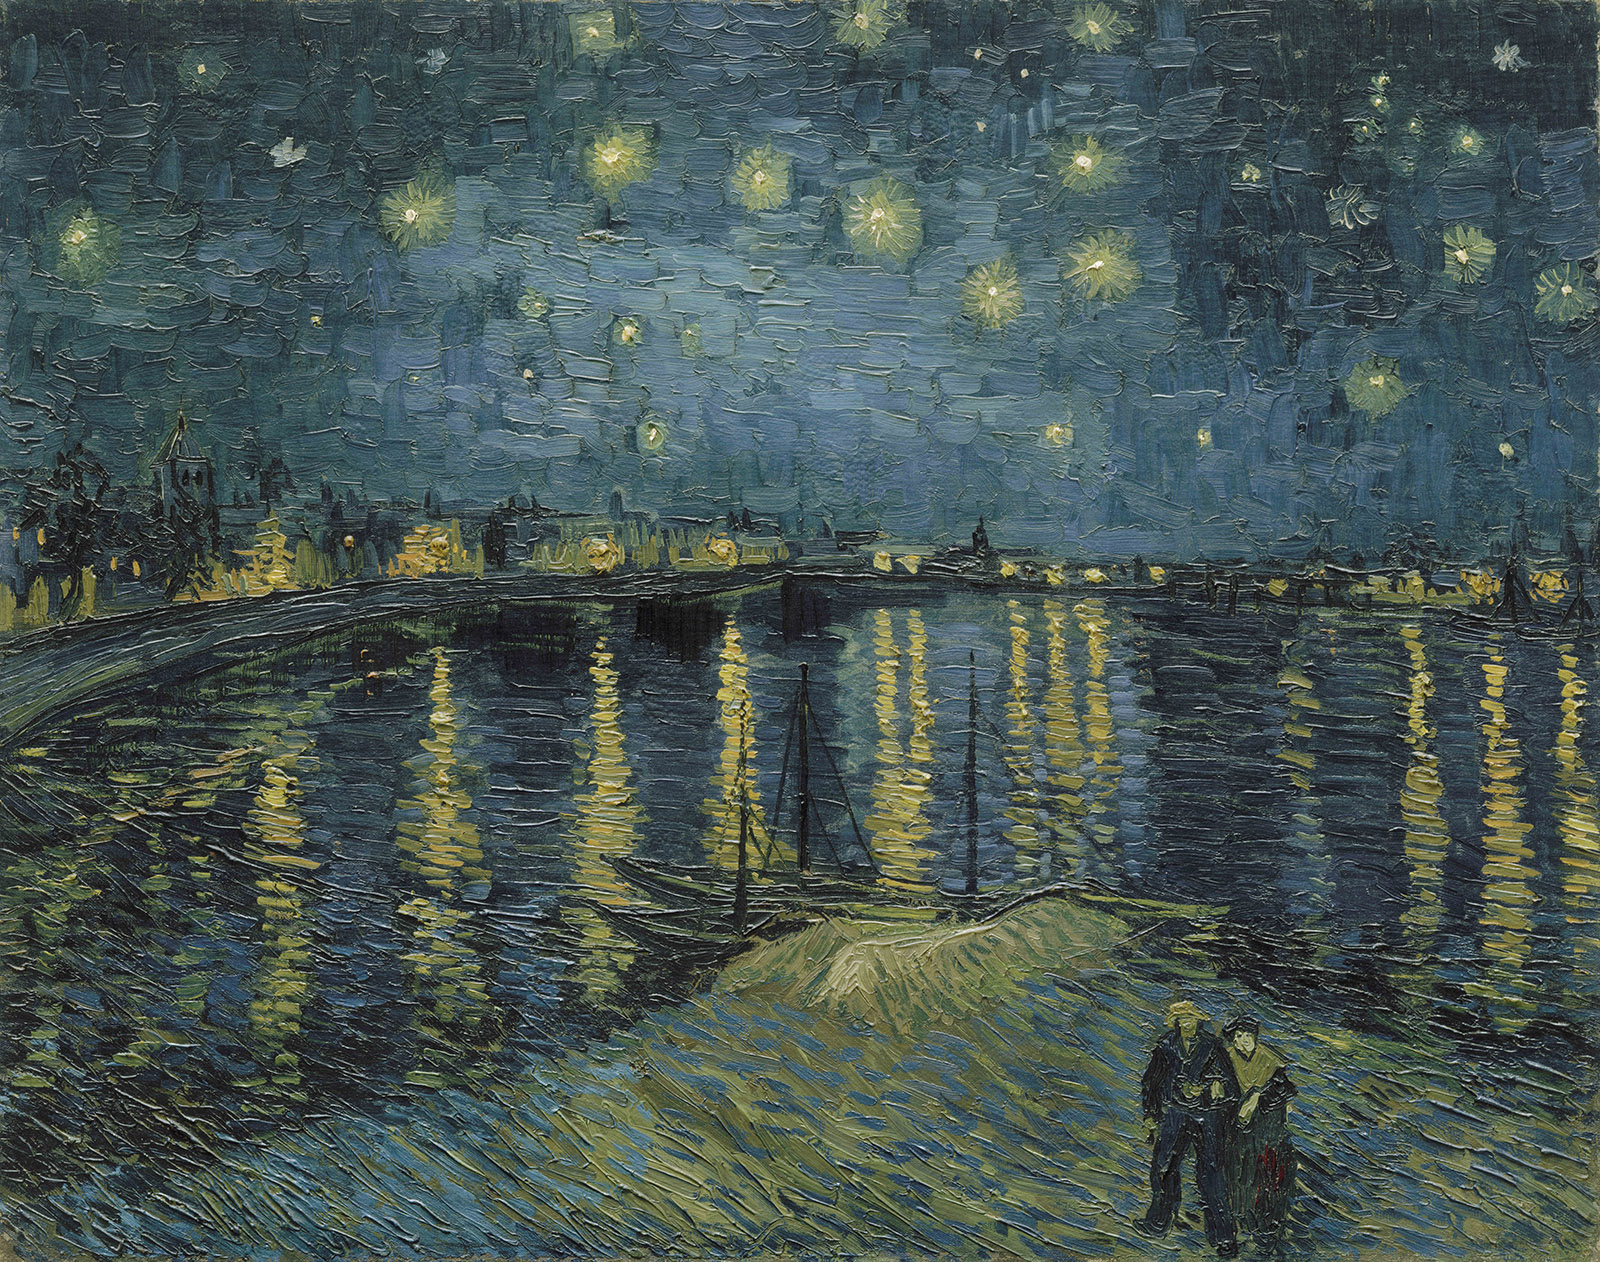 From Writer to Painter: Van Gogh